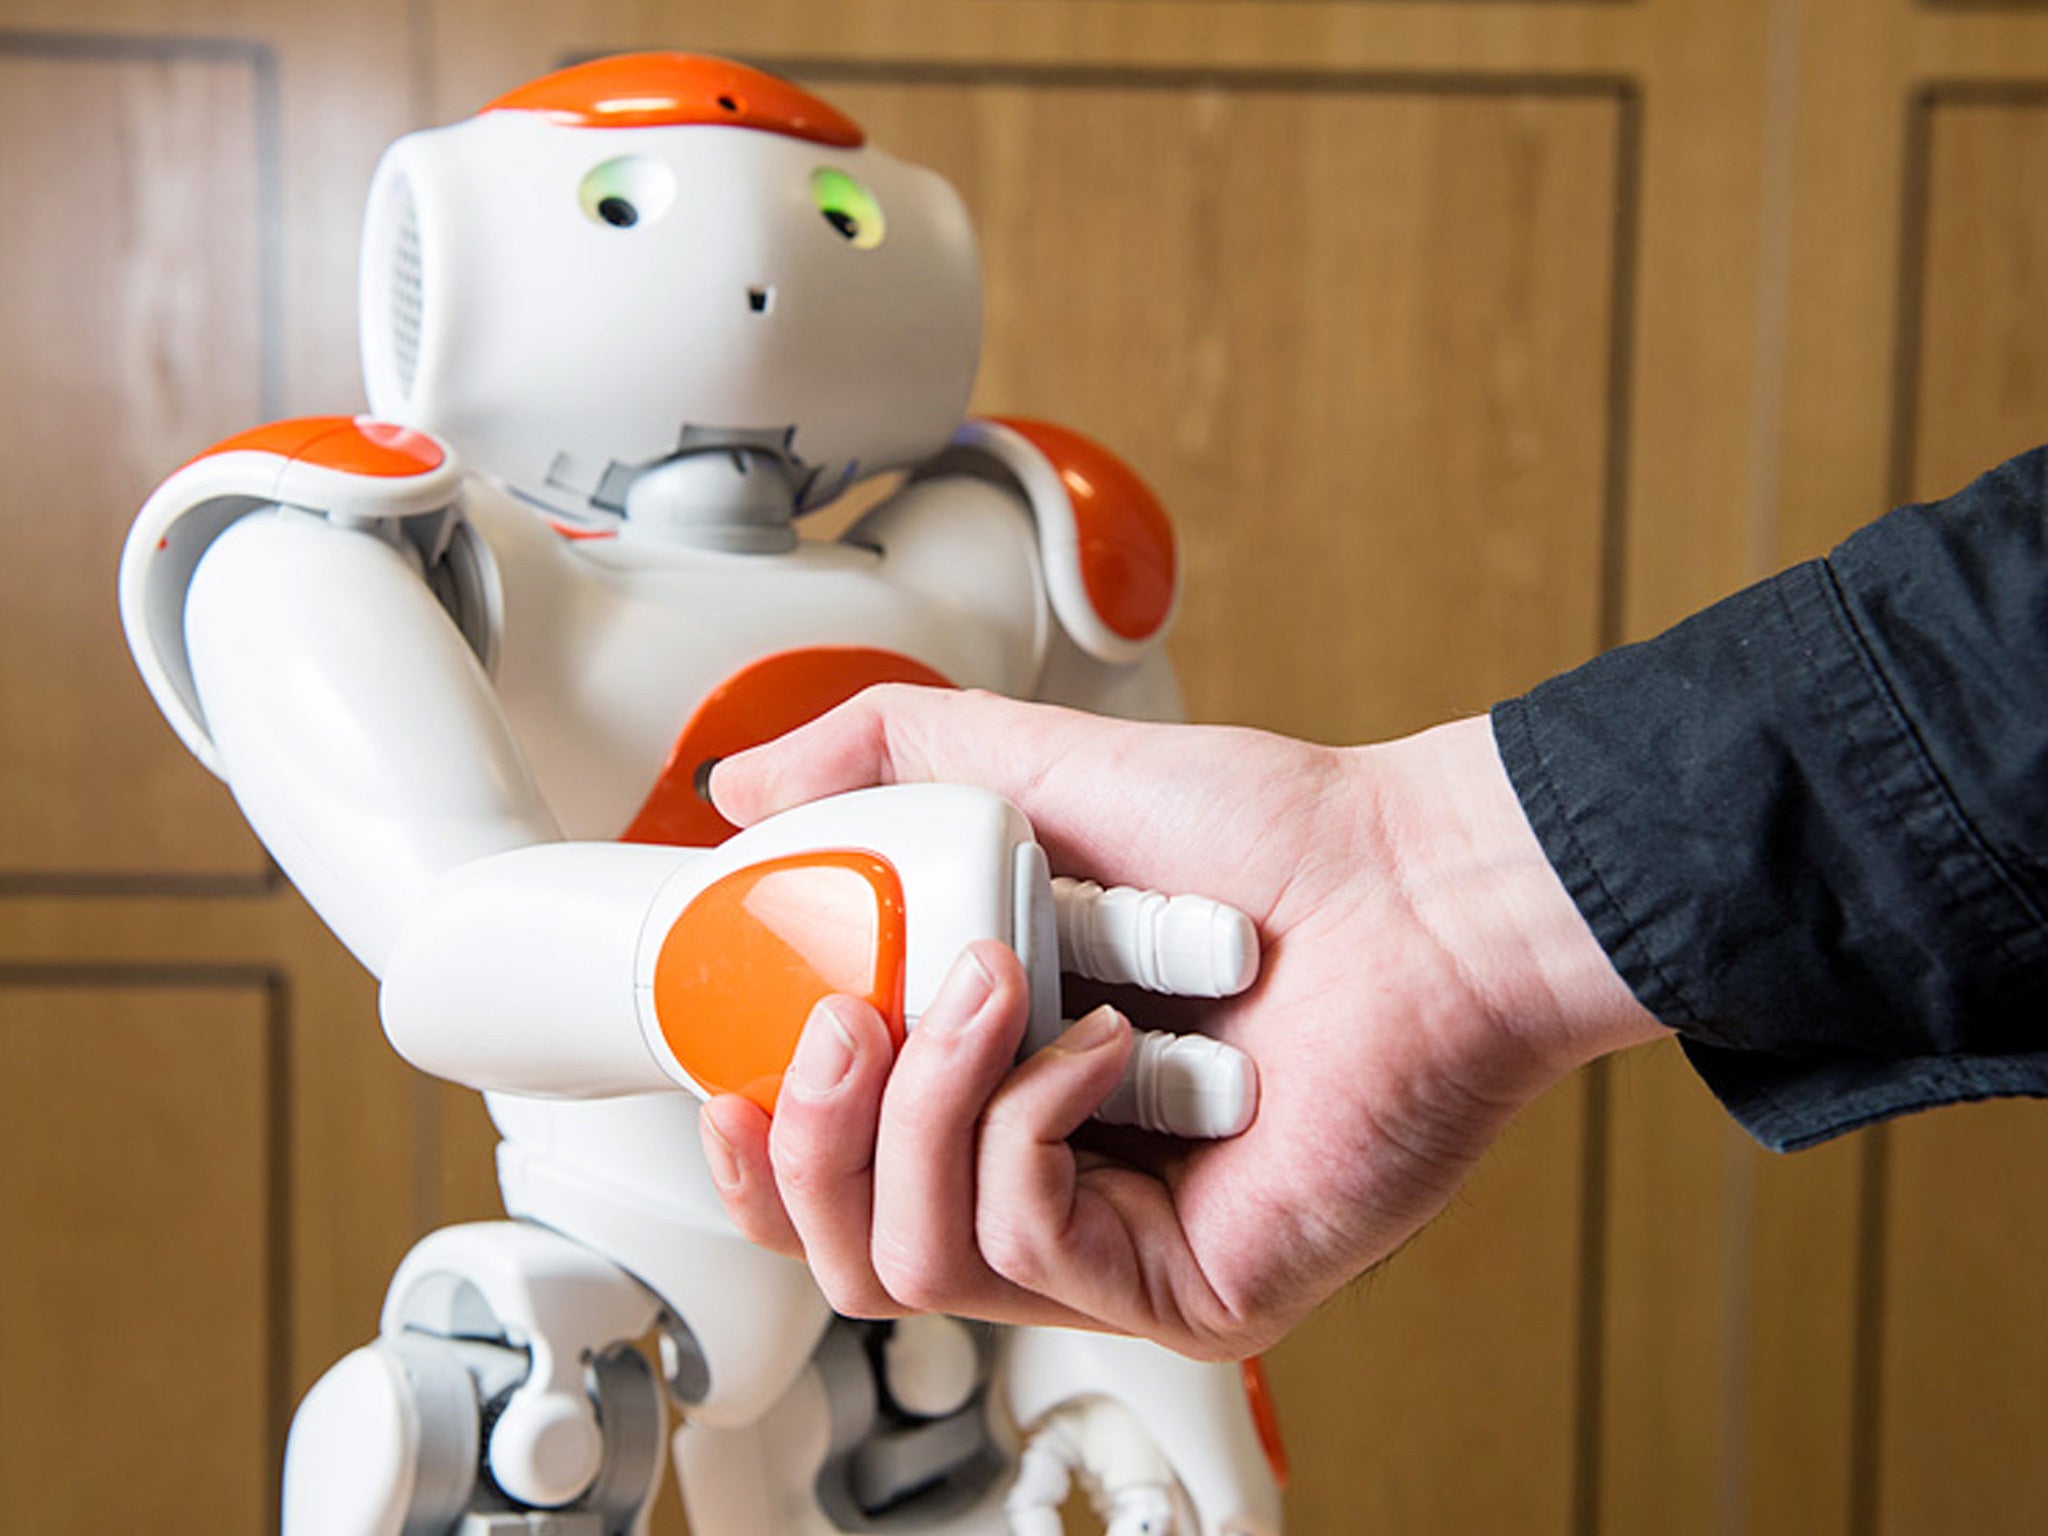 A robot called Nao showed a handshake builds trust when it represented one party in a mock house sale, a study found